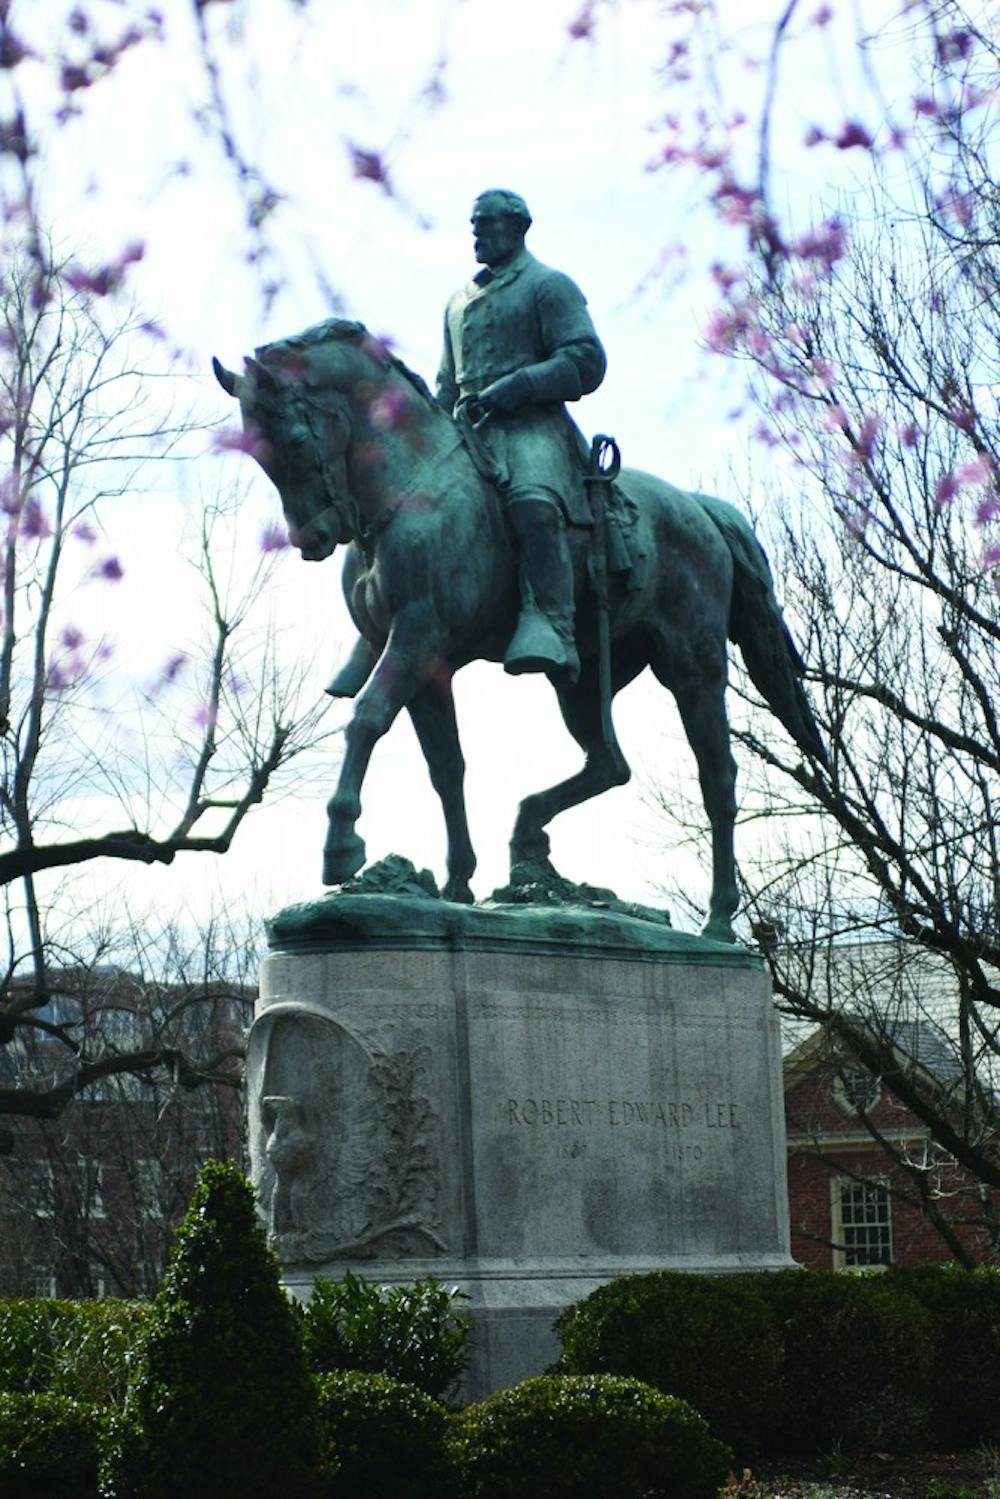 <p>The statue of Robert E. Lee currently resides in Emancipation Park.</p>